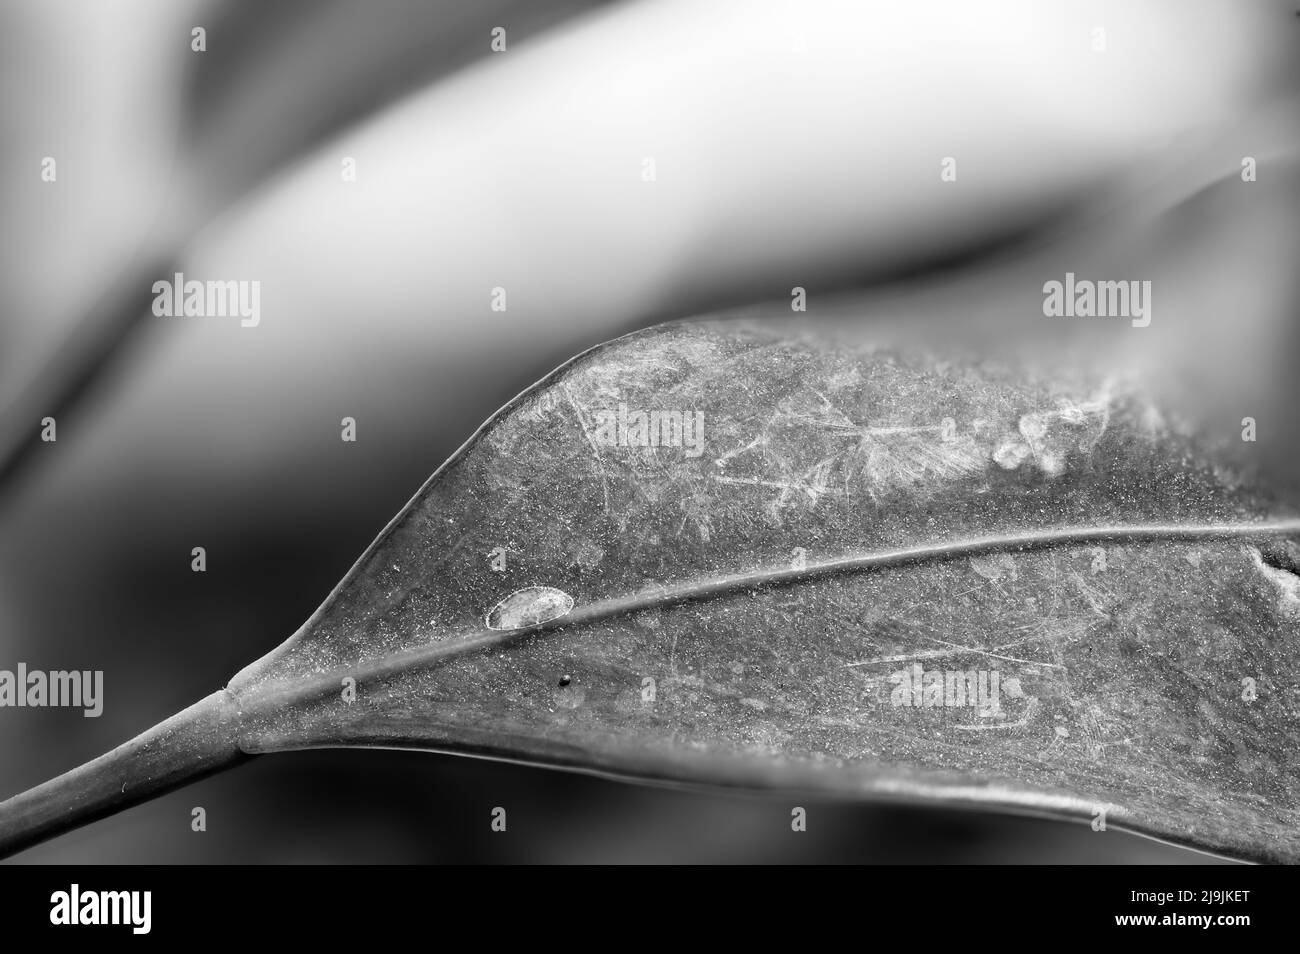 Focus on a single pest scale insect on an indoor houseplant leaf. Stock Photo